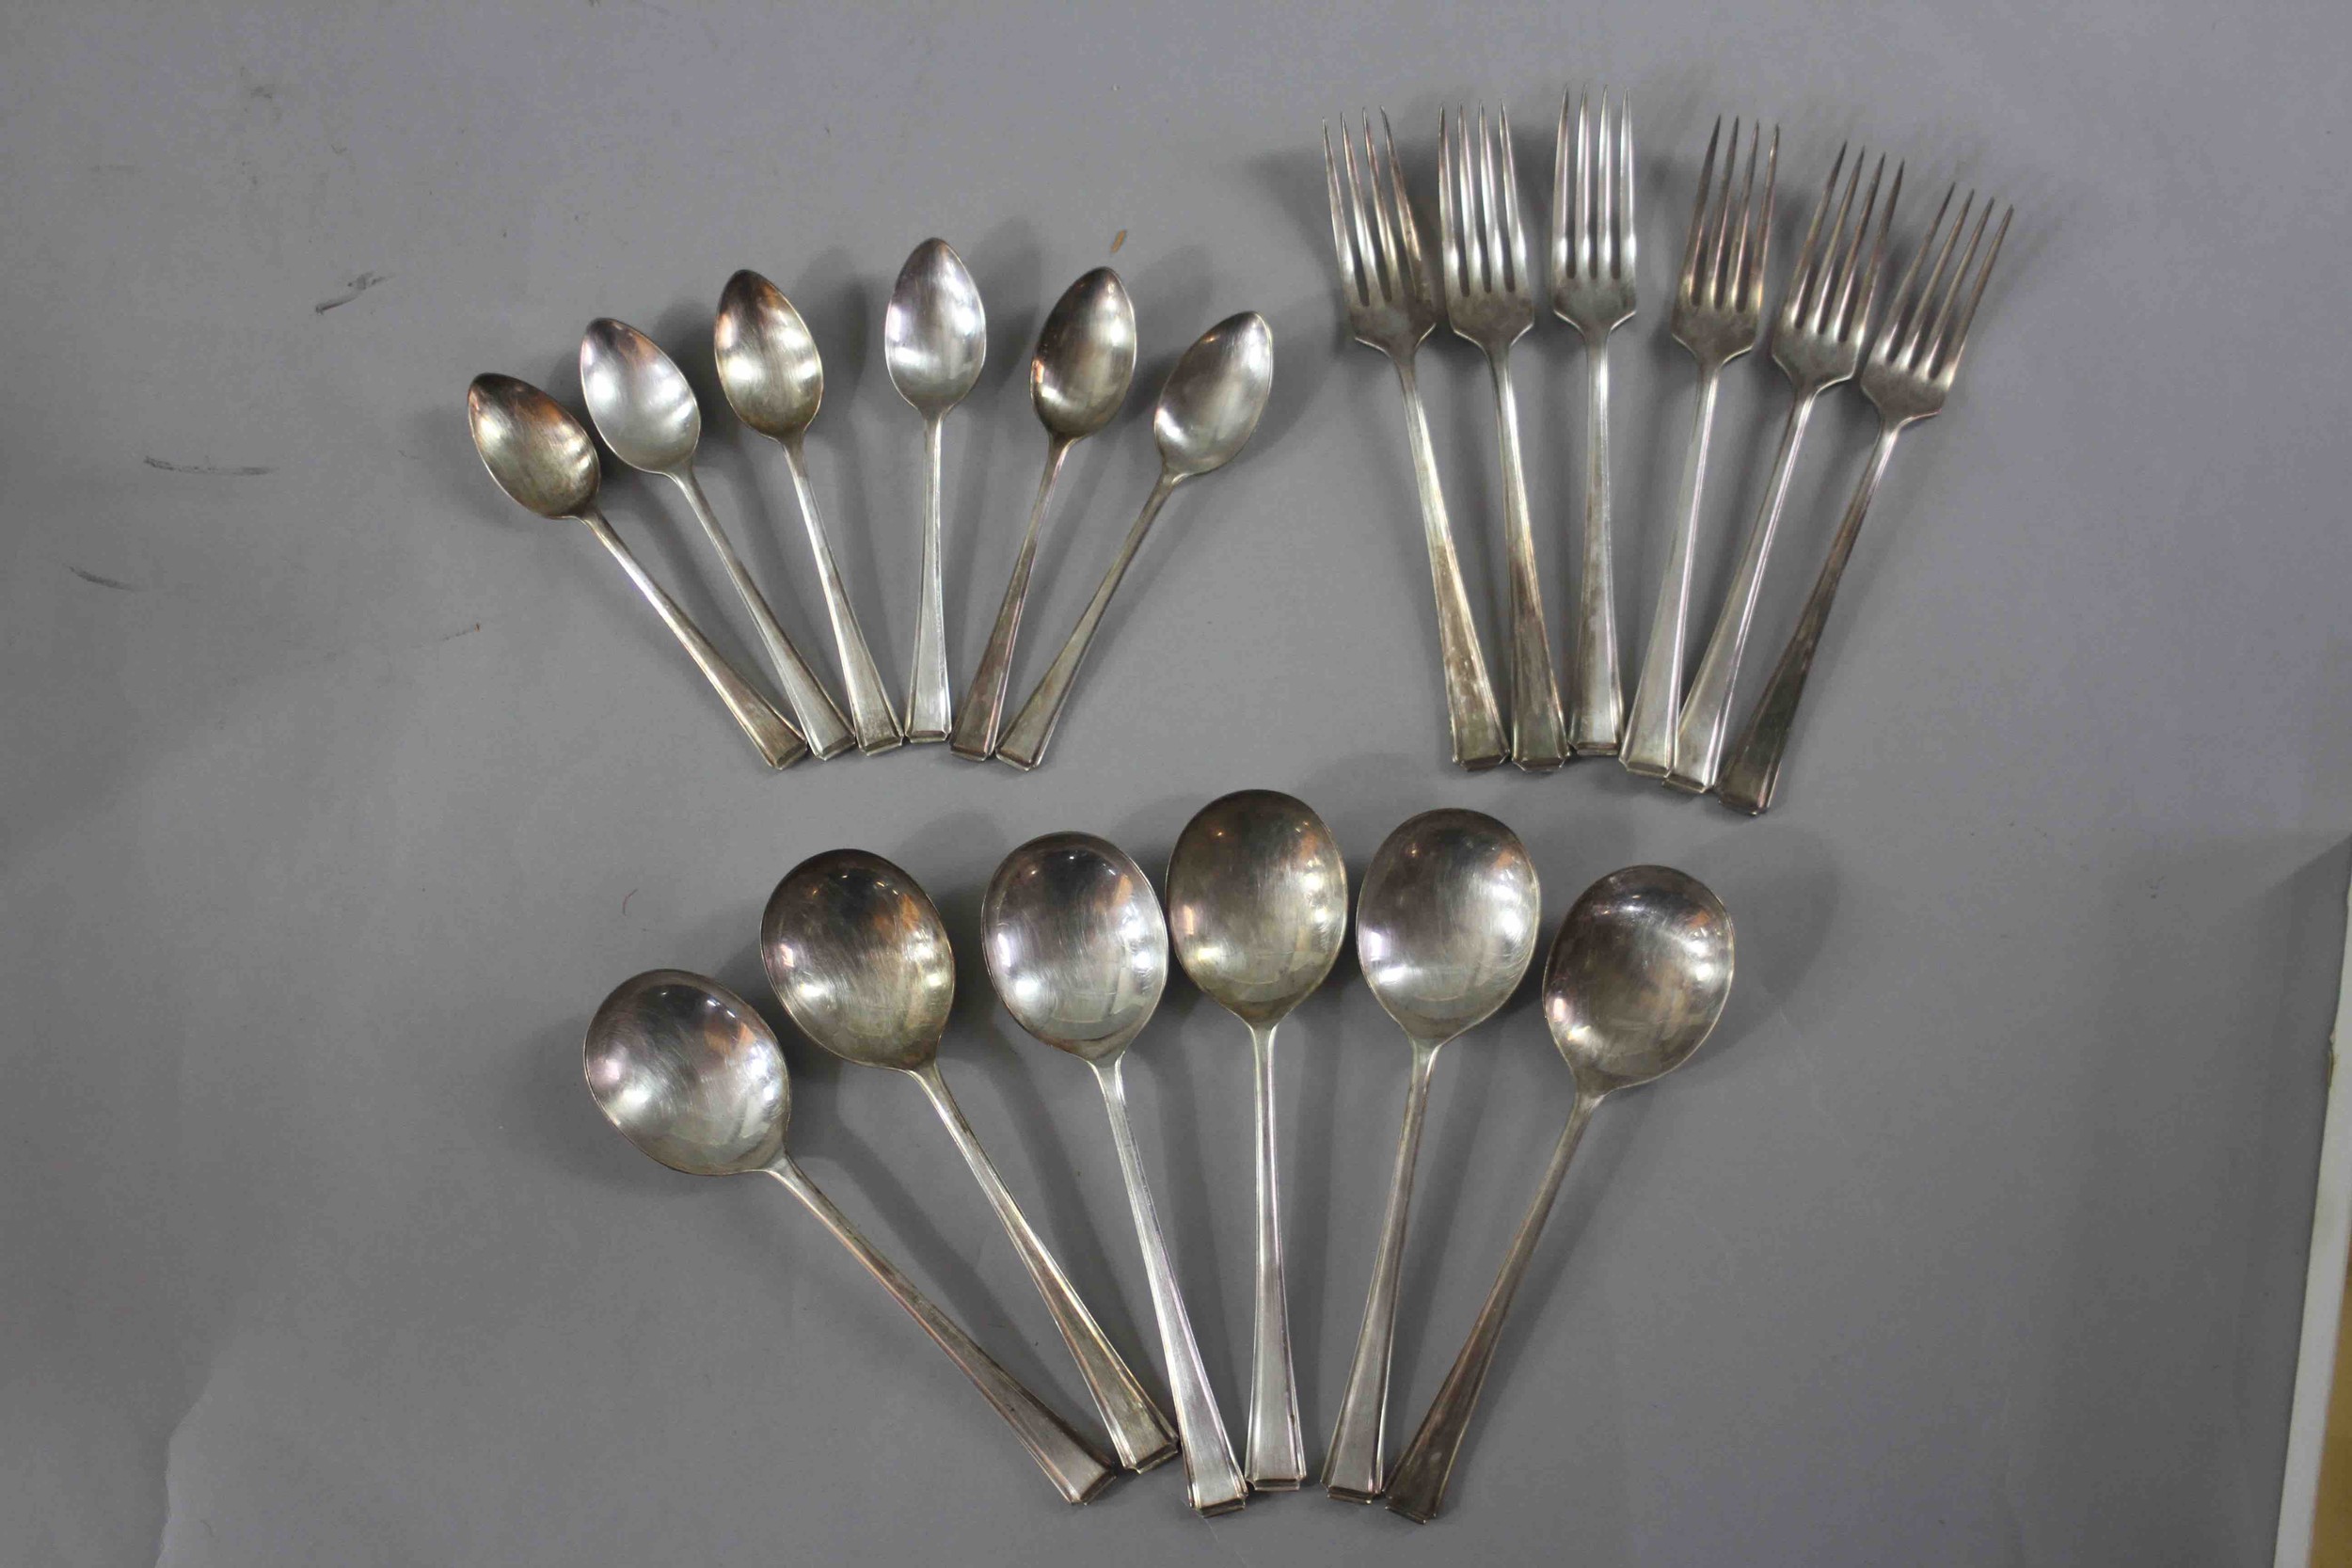 Three boxes of Priestly & Moore silver plated forks and spoons. (18 pieces in total) - Image 7 of 8